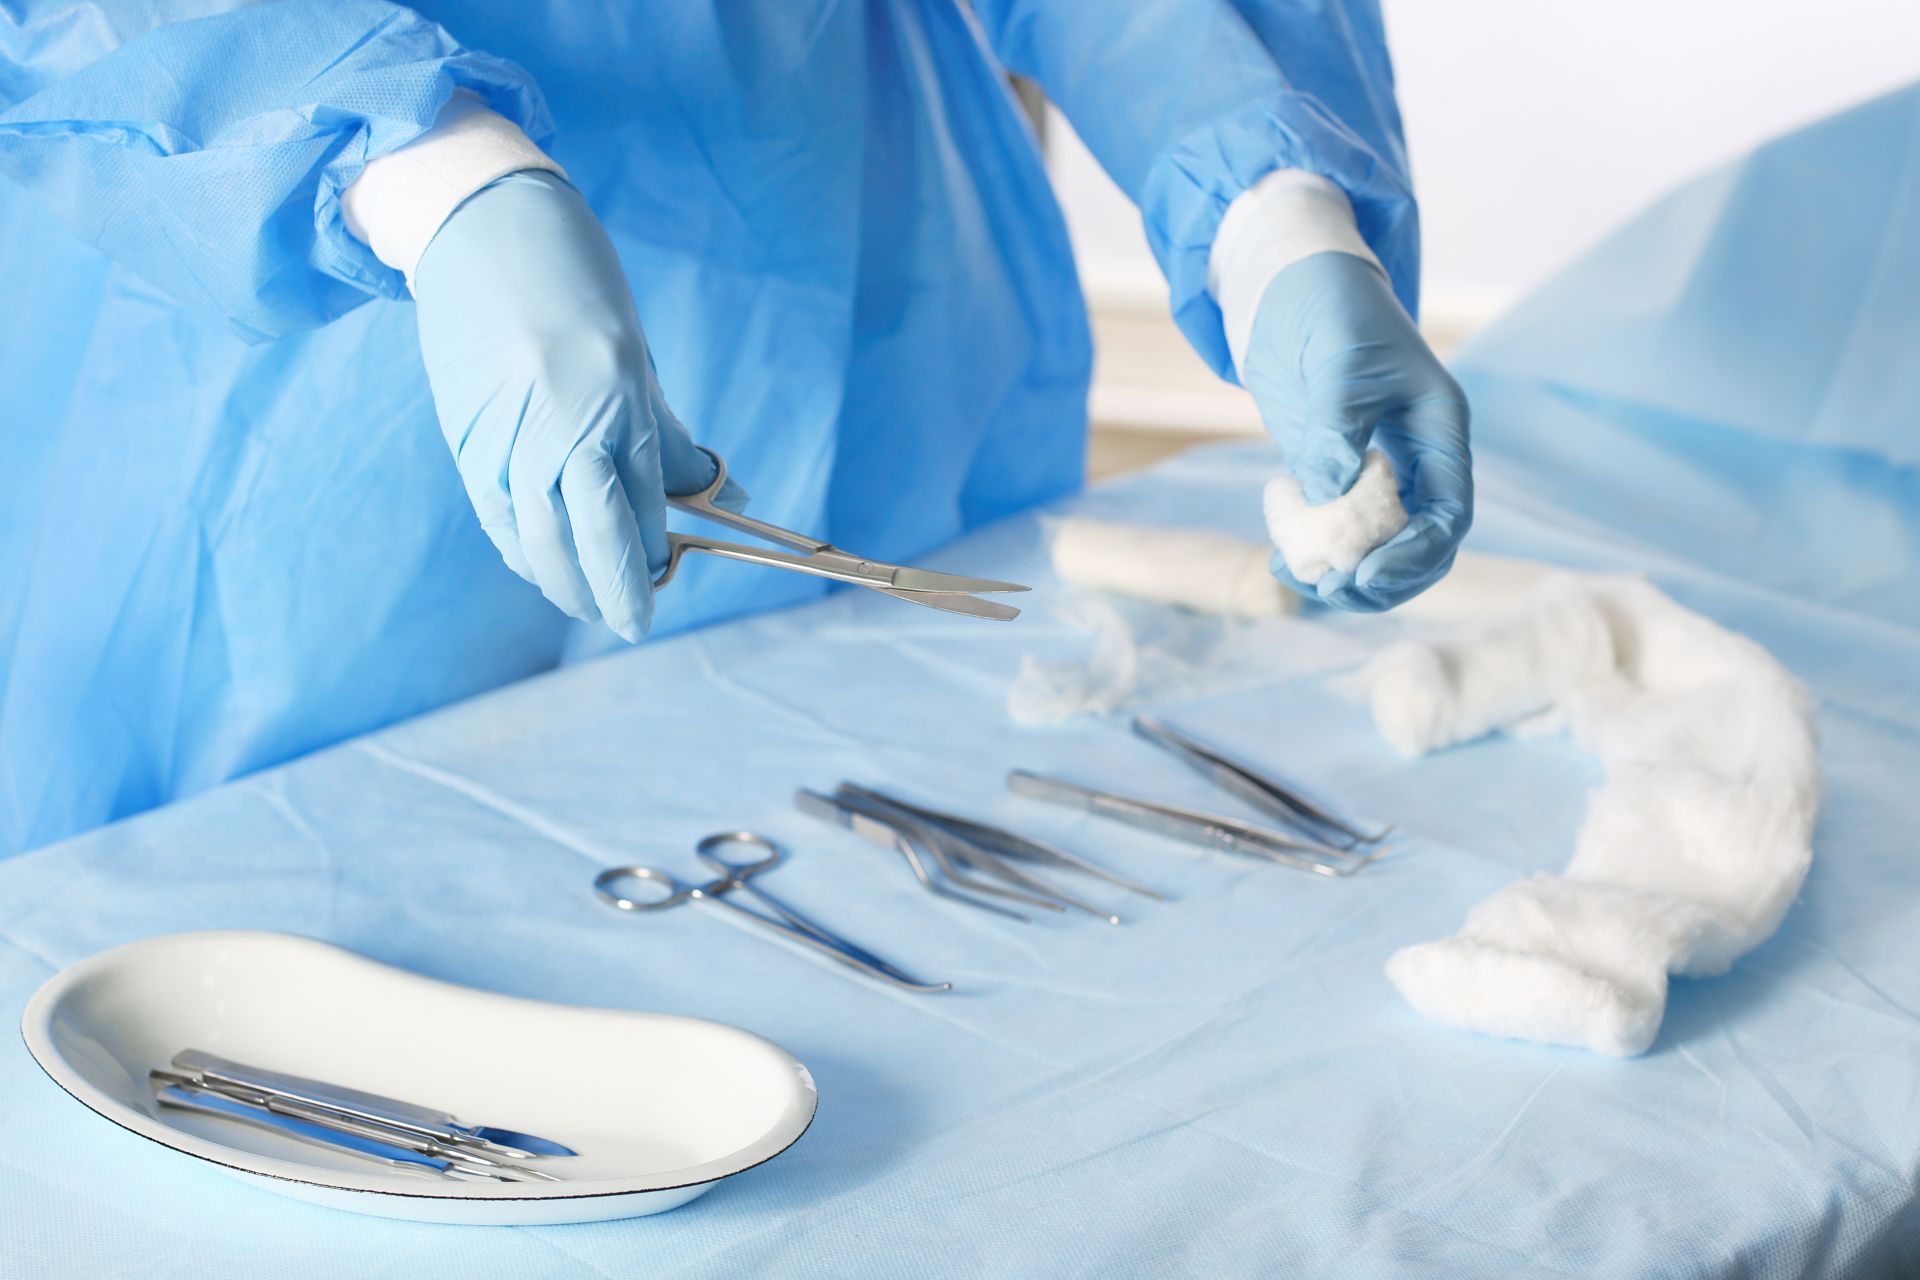 surgeon with tools on table